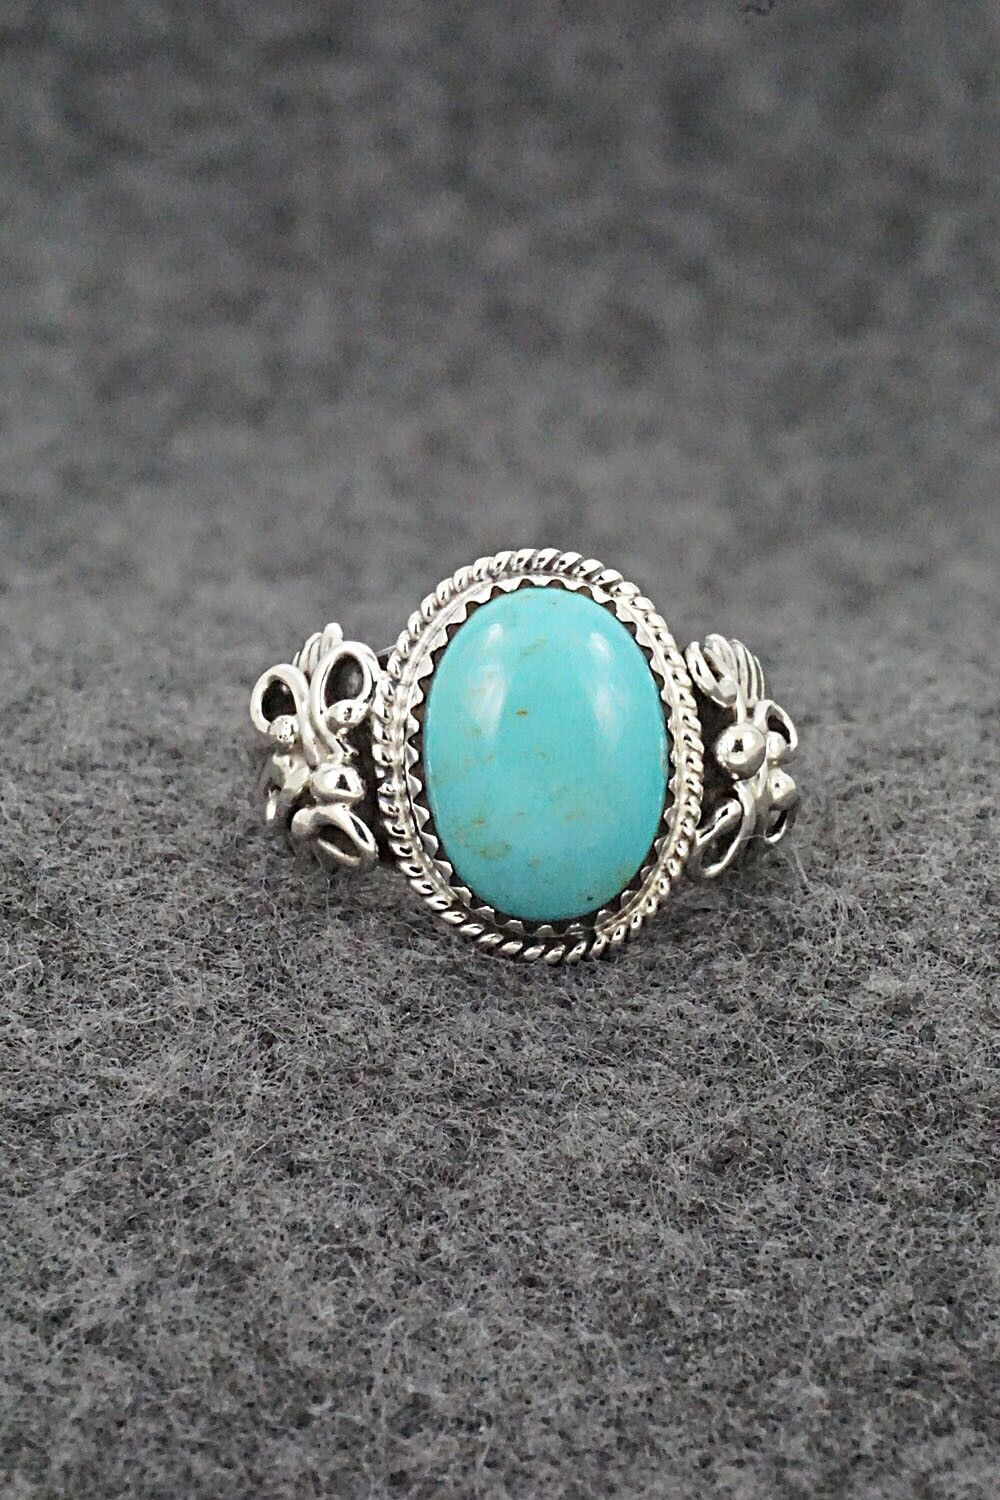 Turquoise & Sterling Silver Ring - Jeannette Saunders - Size 6